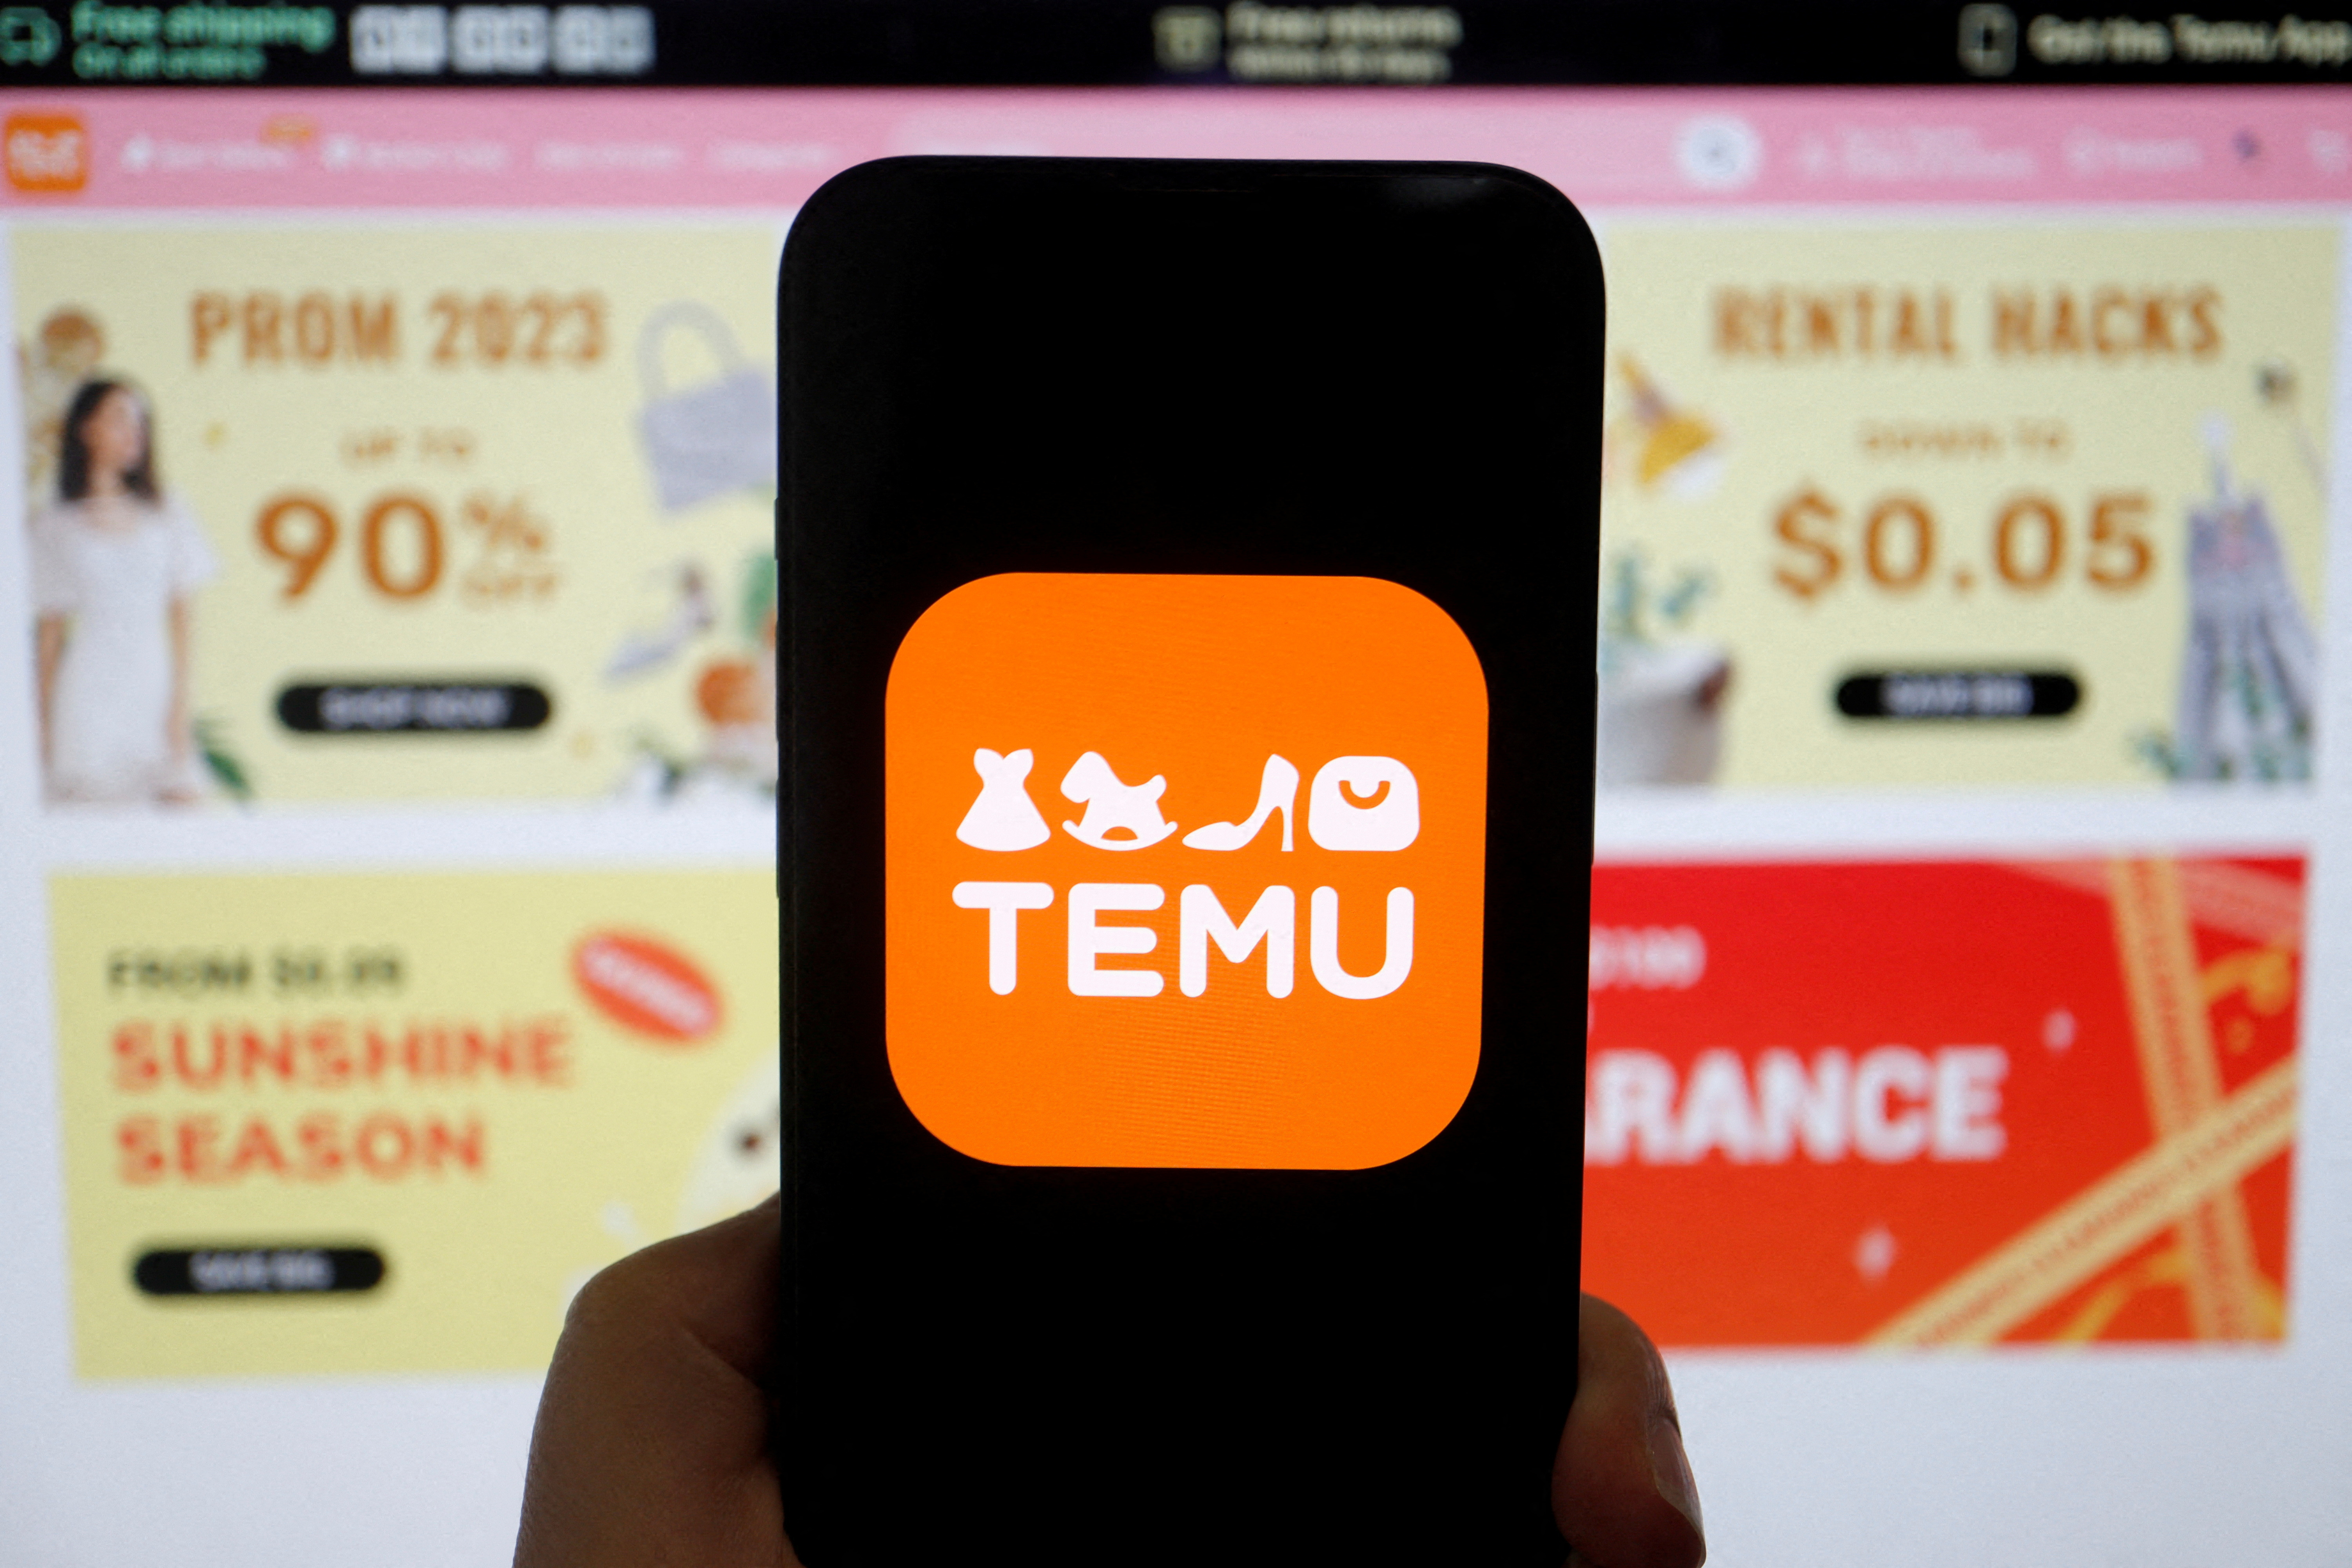 Internet shopping gets even more competitive with Temu, Shein - CGTN